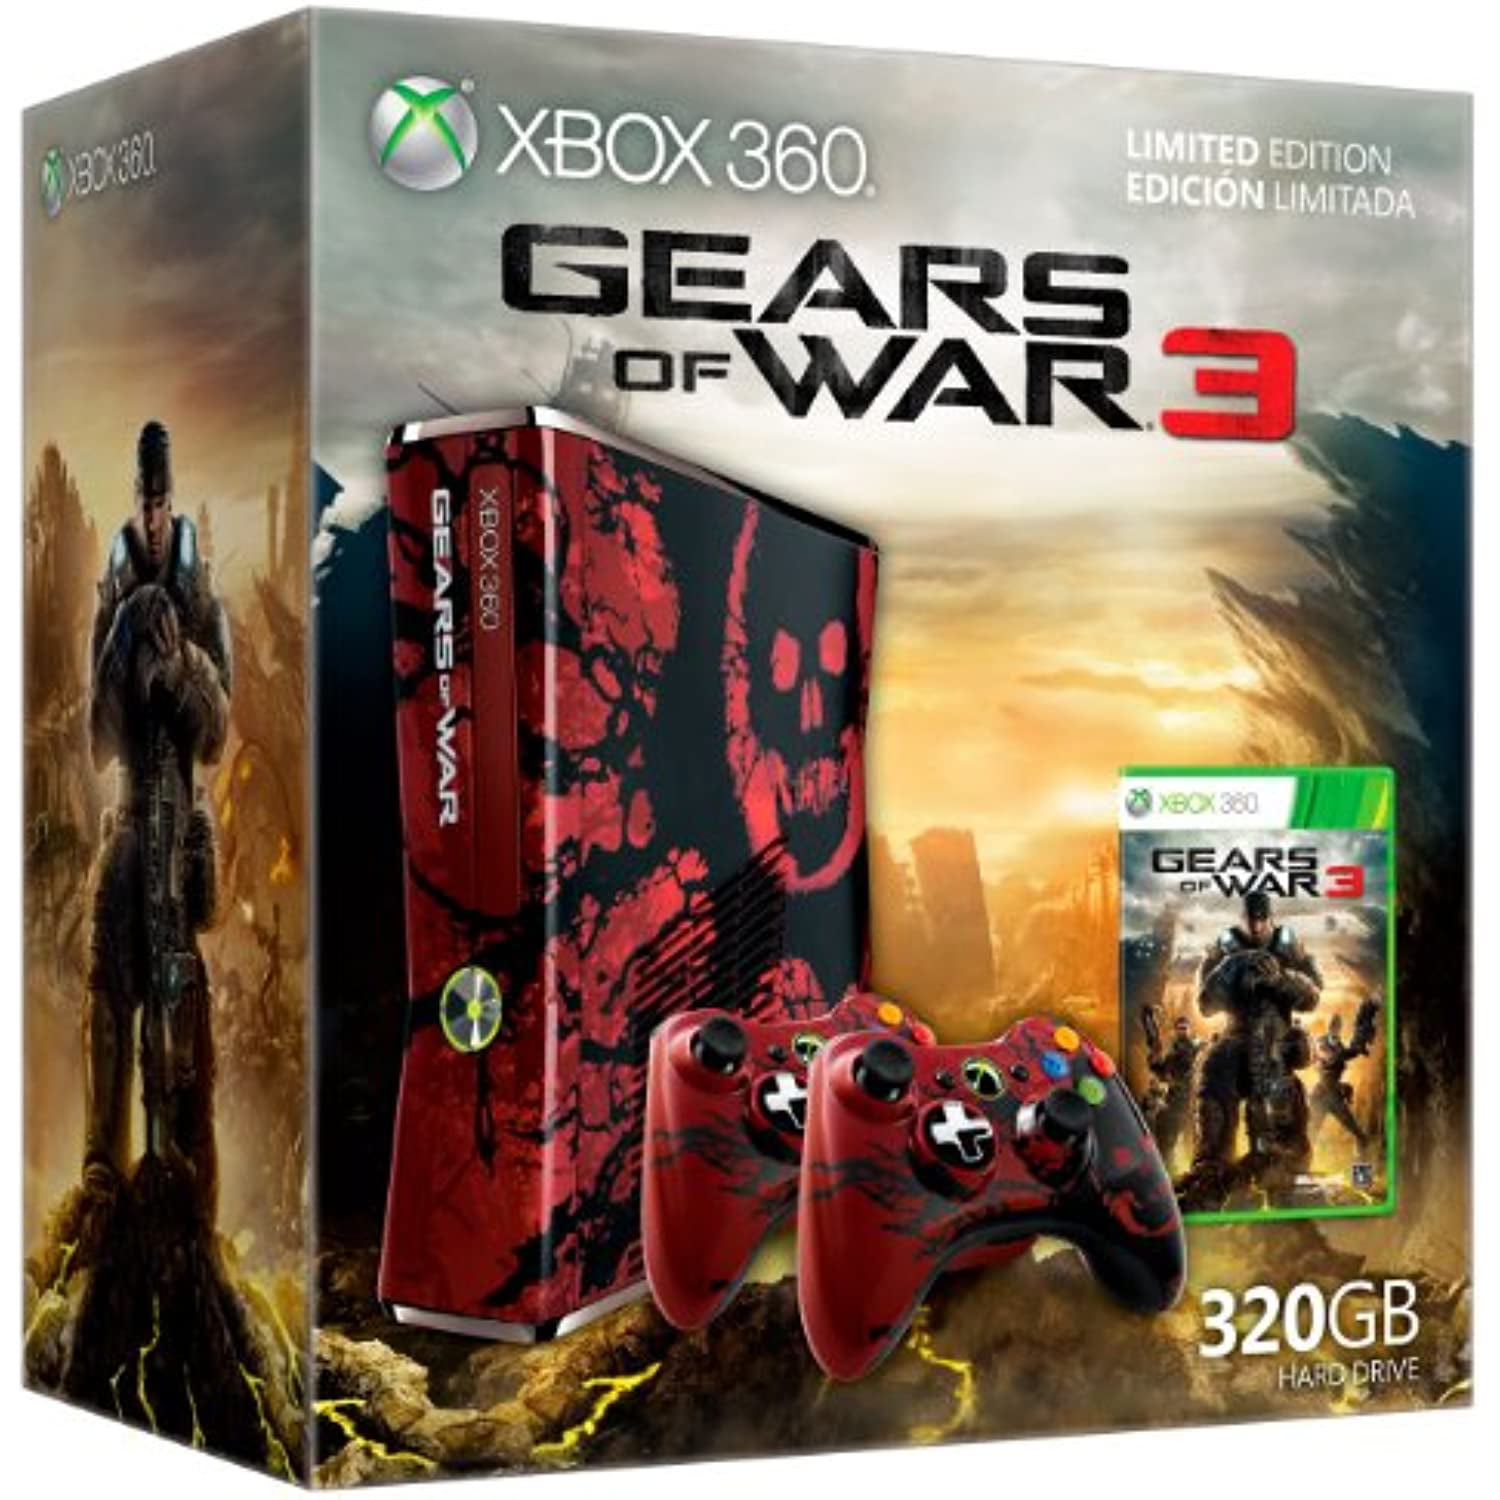 Gears of War 3 XBOX 360 Review